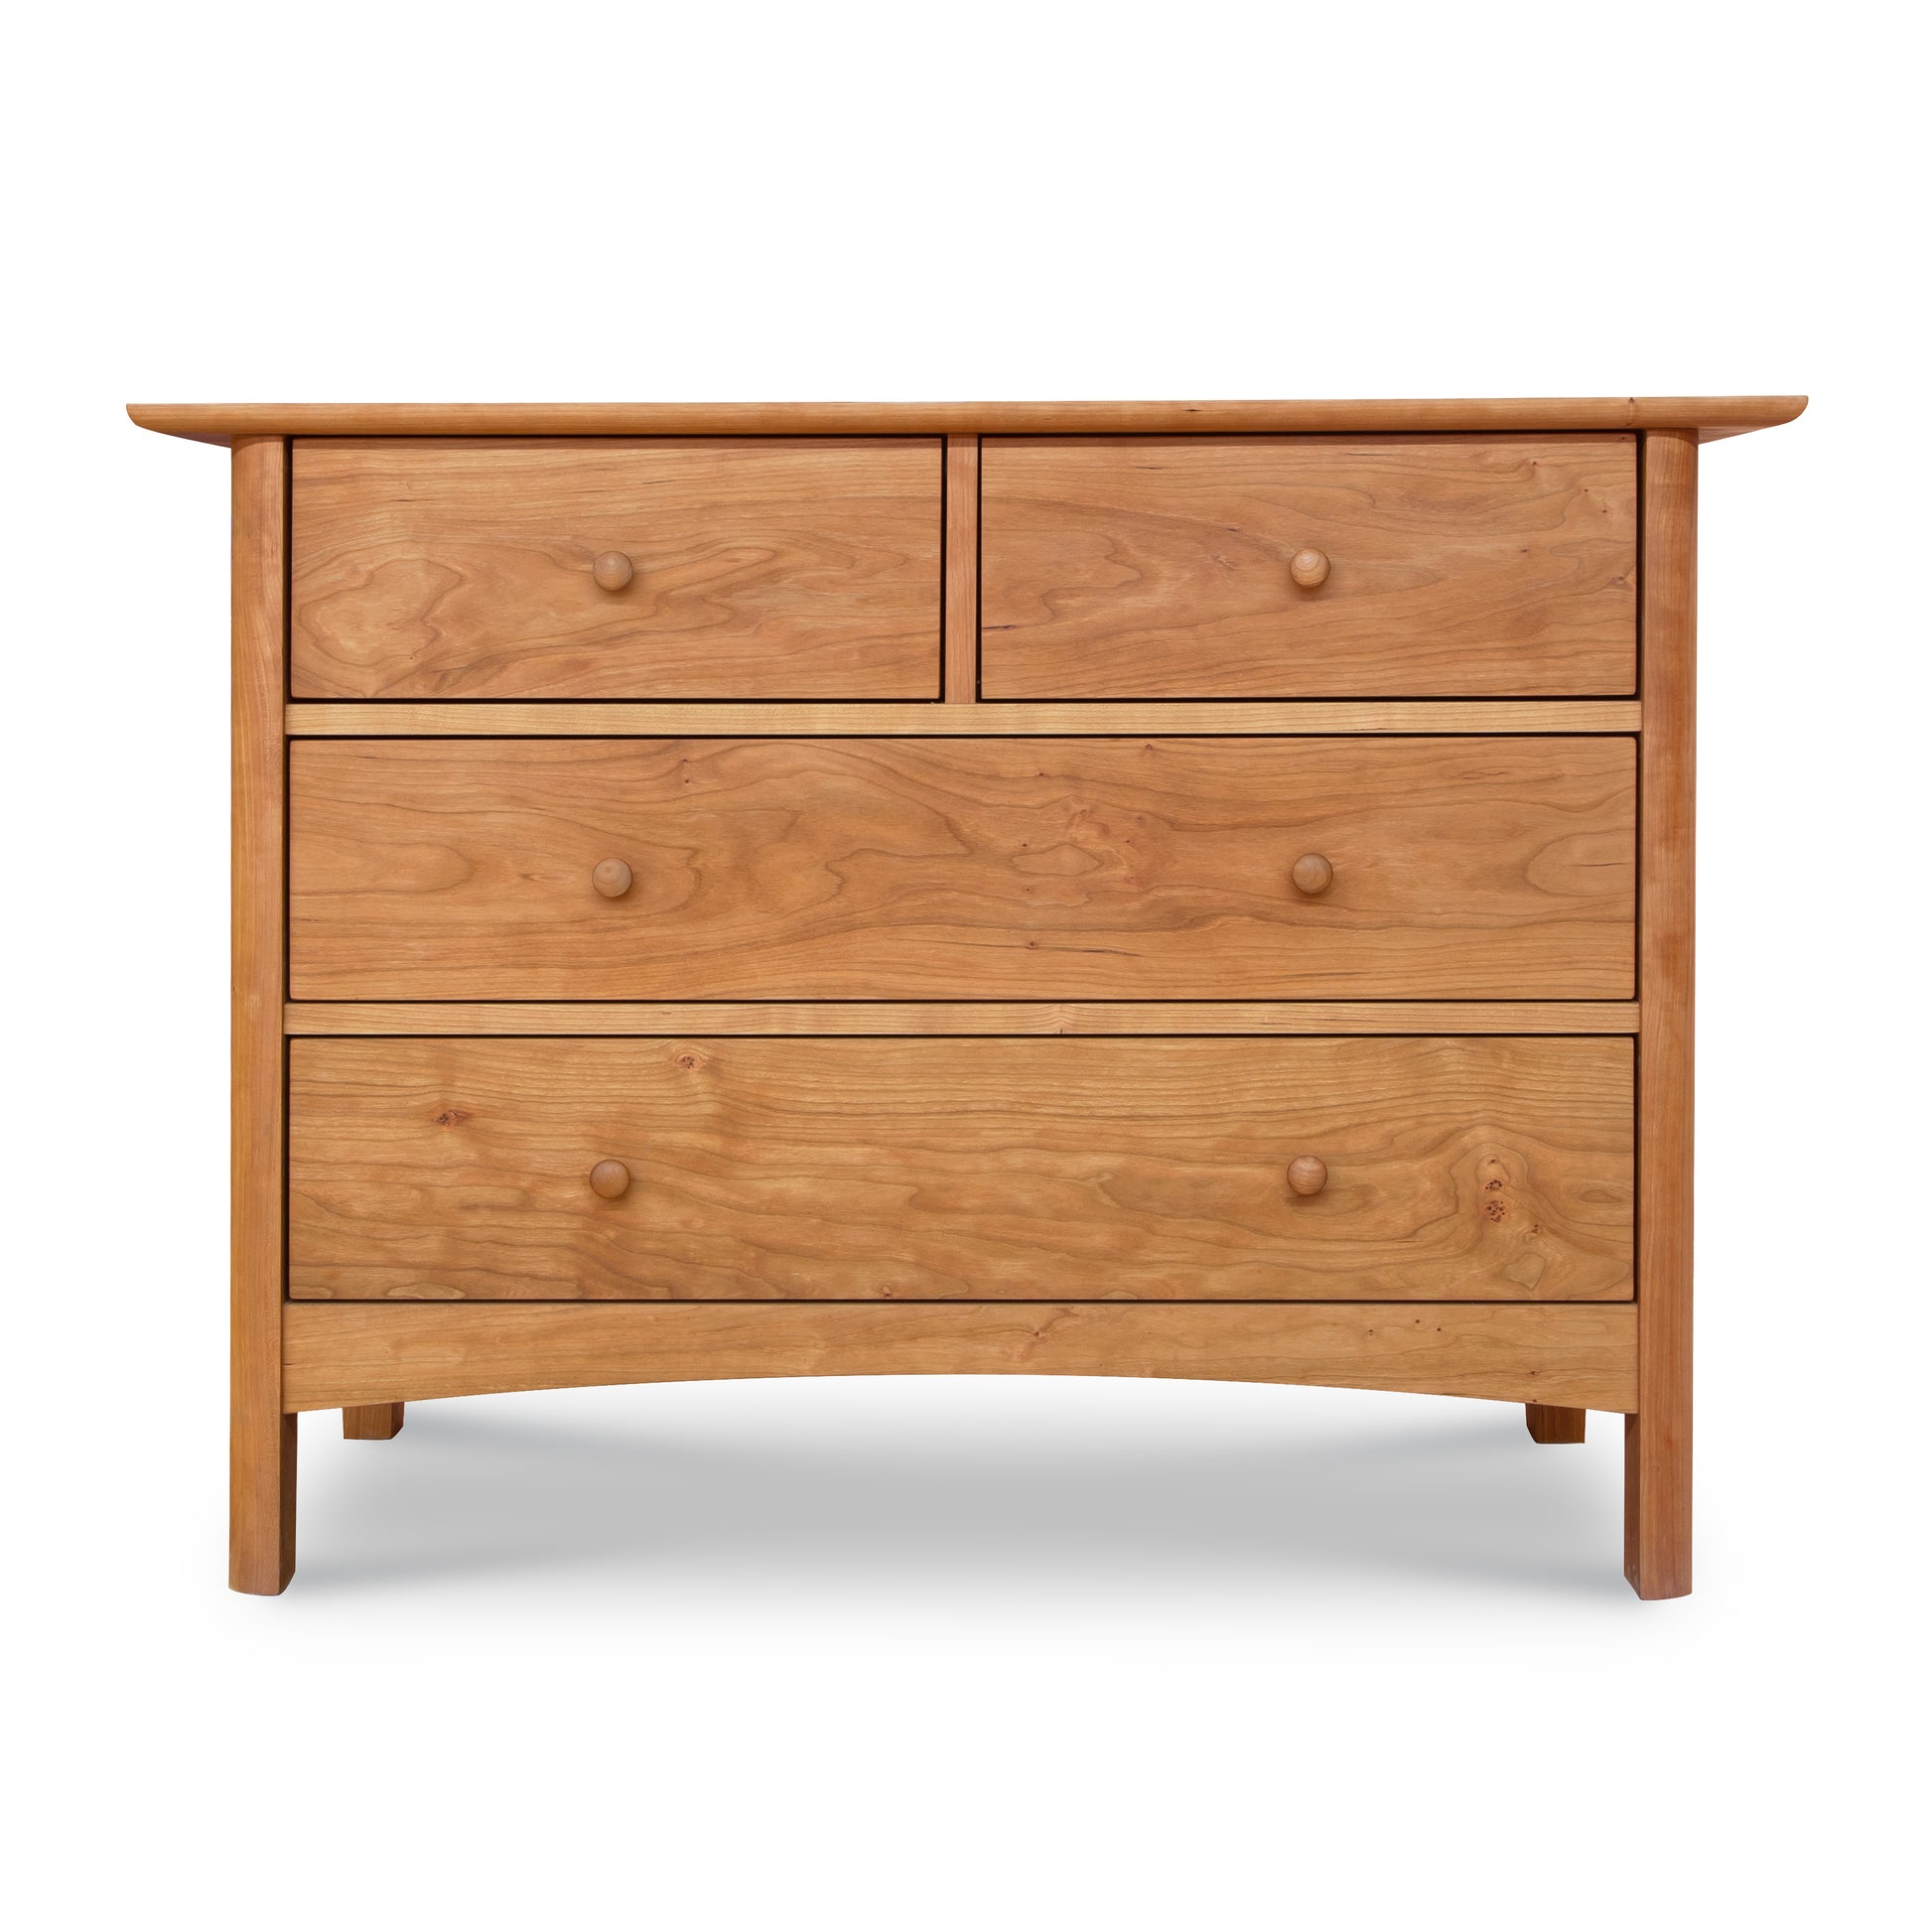 A Heartwood Shaker 4-Drawer Dresser by Vermont Furniture Designs with six drawers against a white background.